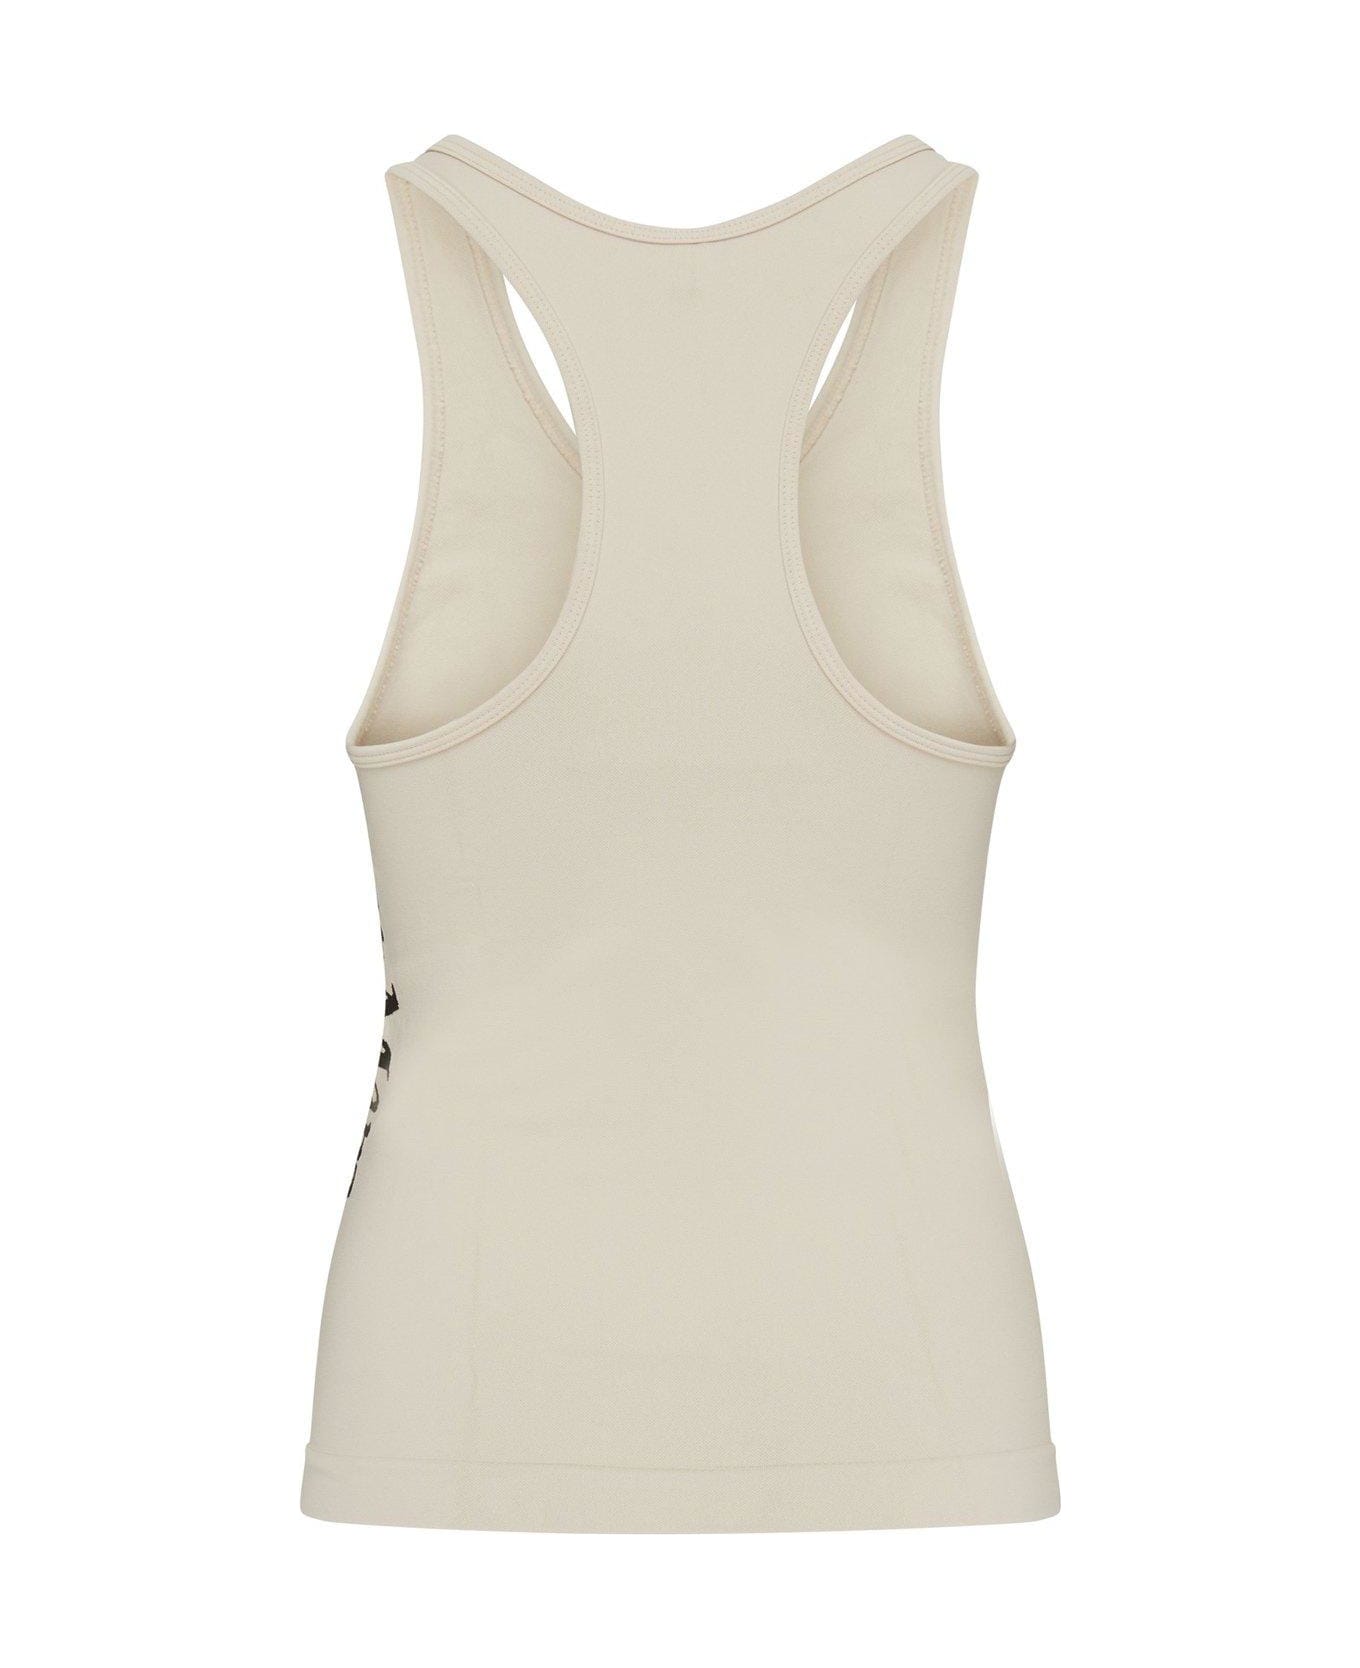 'S Max Mara Logo Detailed Stretched Tank Top - NEUTRALS